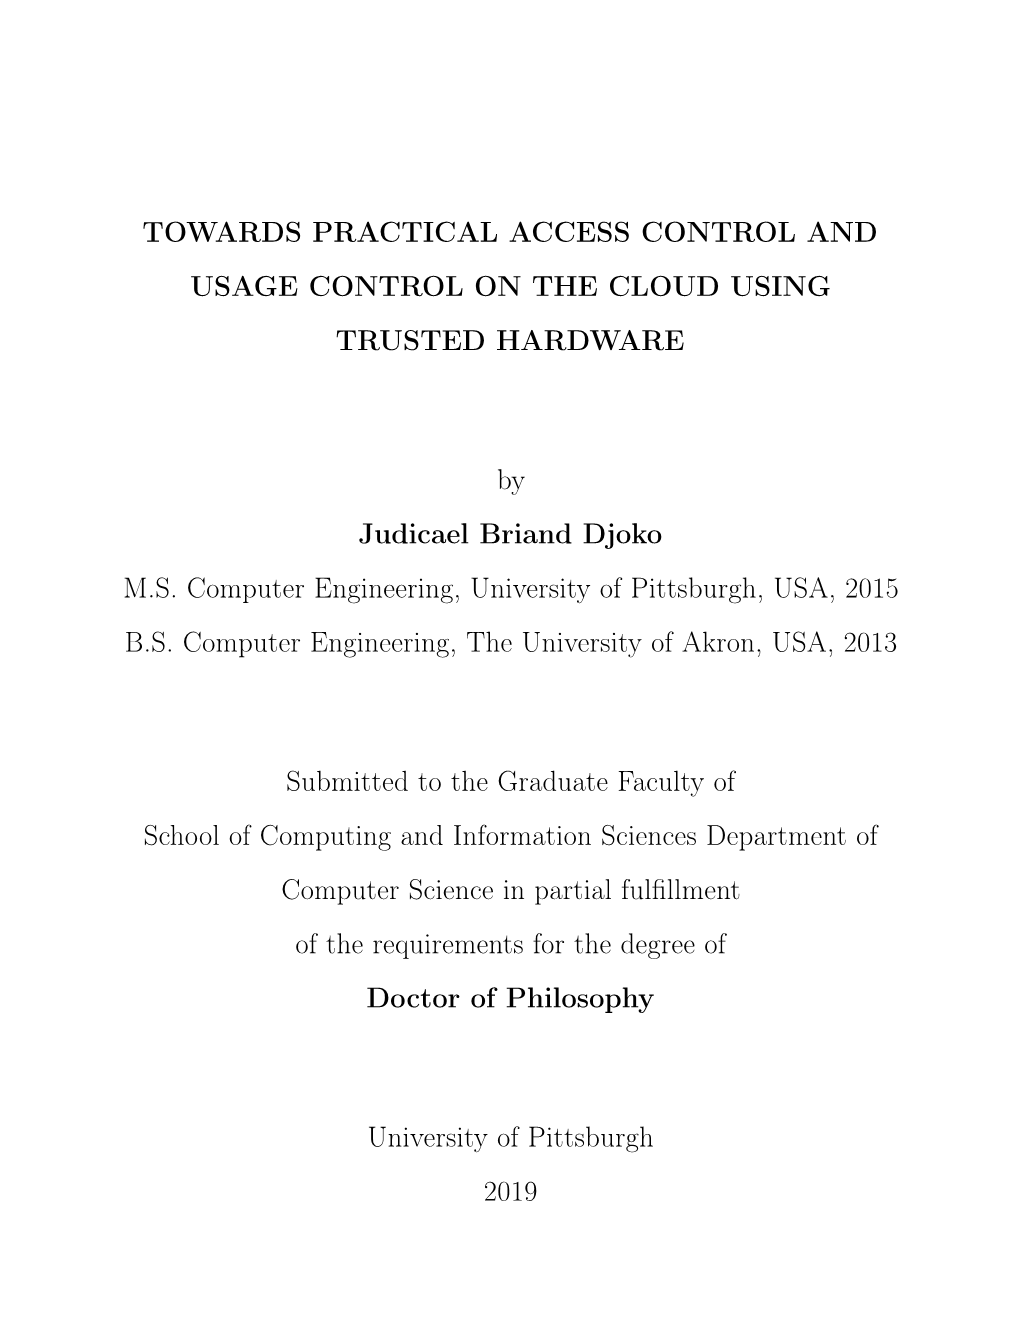 Towards Practical Access Control and Usage Control on the Cloud Using Trusted Hardware